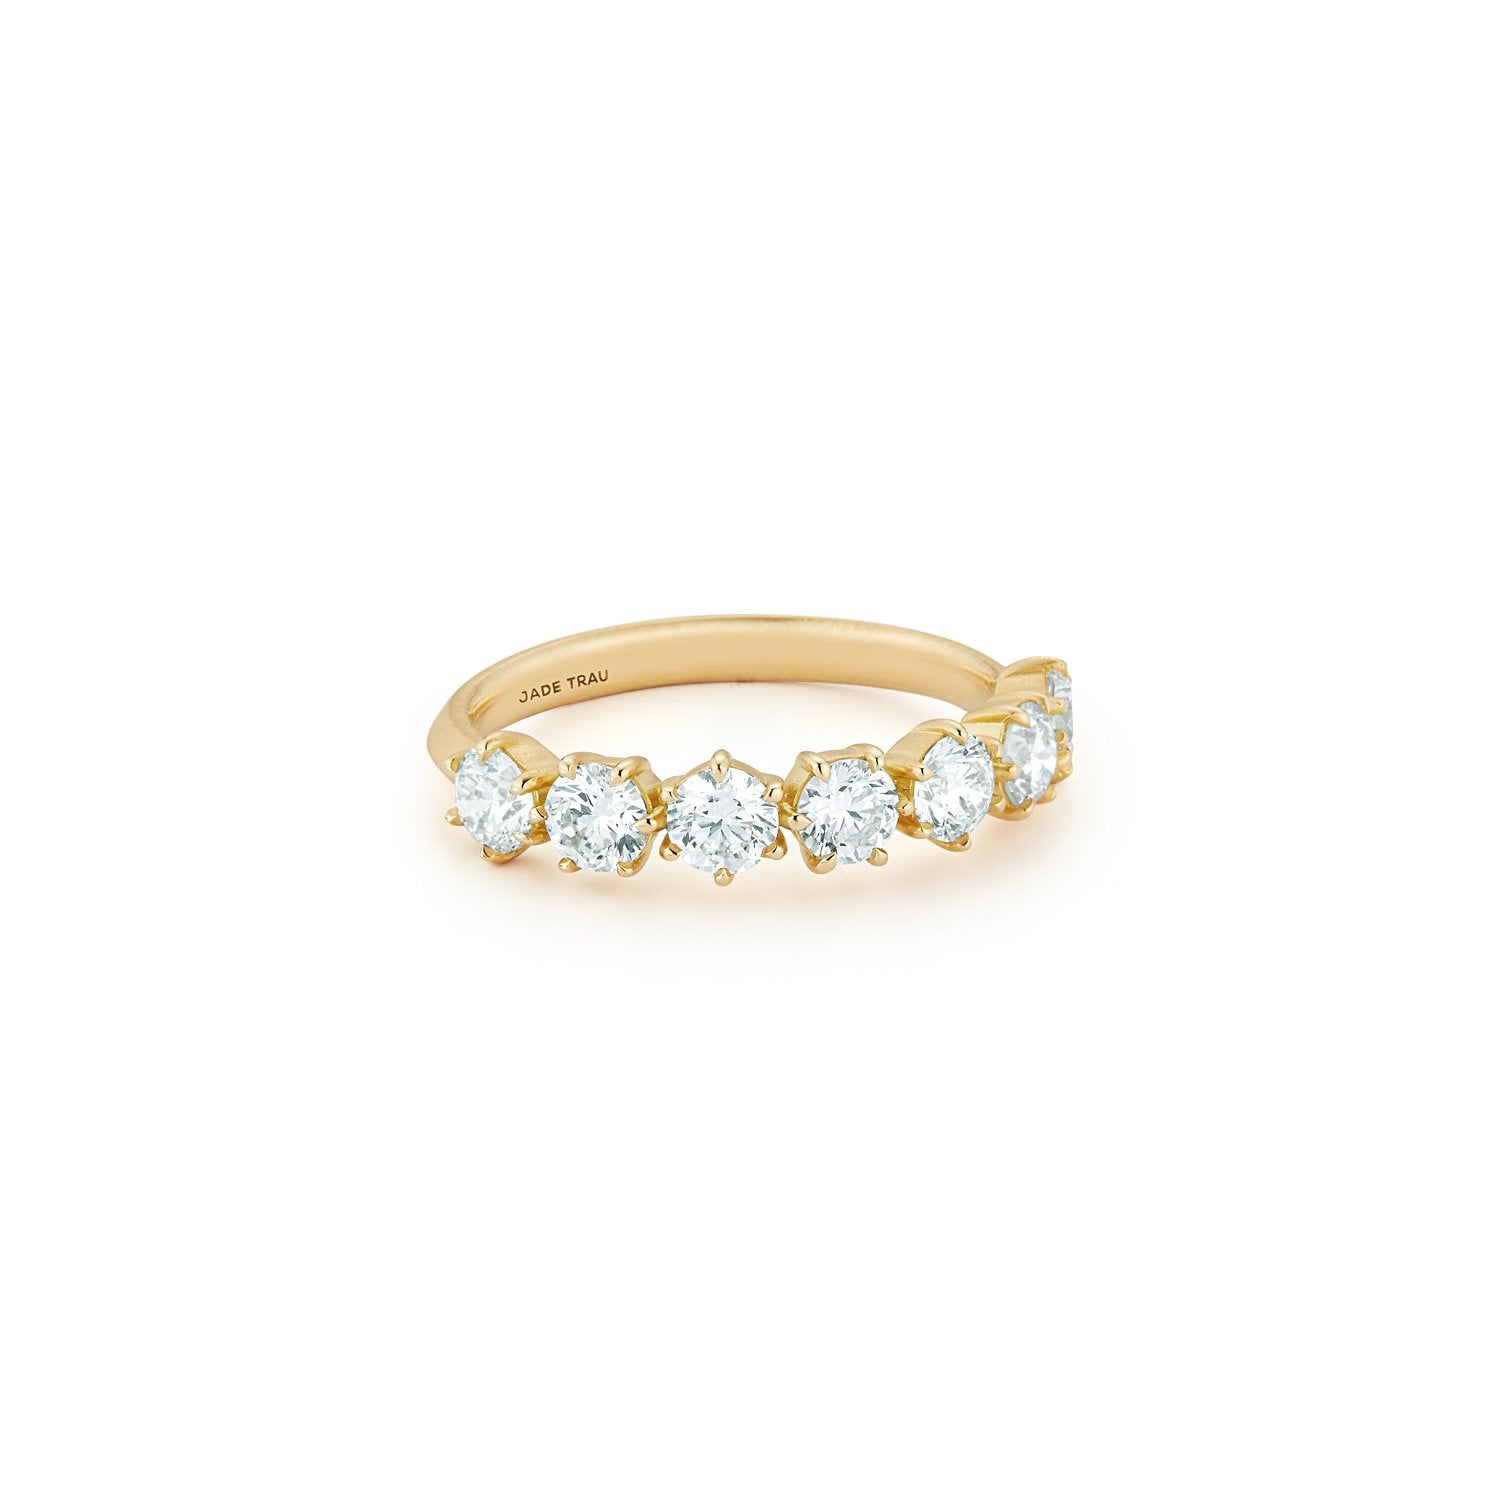 Catherine 1/2 Way Eternity No. 3 in 18K Yellow Gold